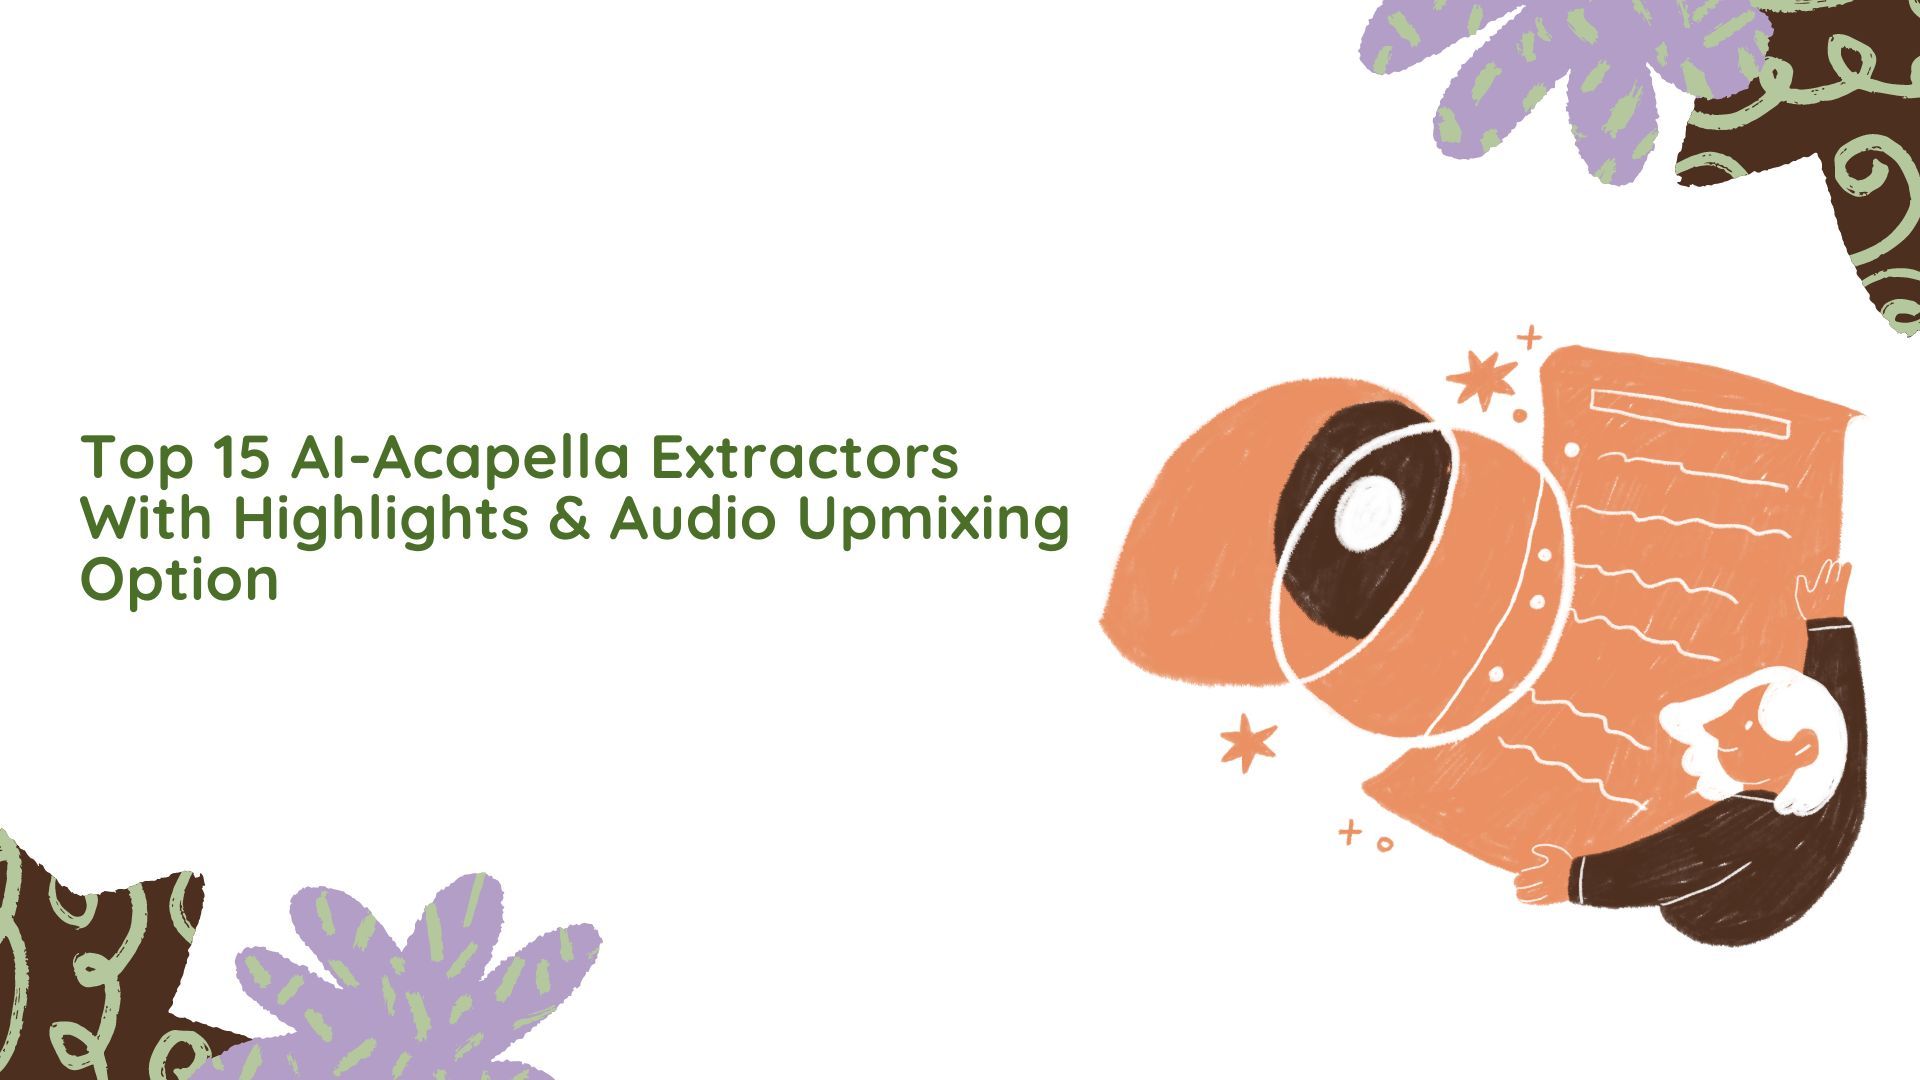 Top 15 AI-Acapella Extractors With Highlights & Audio Upmixing Option